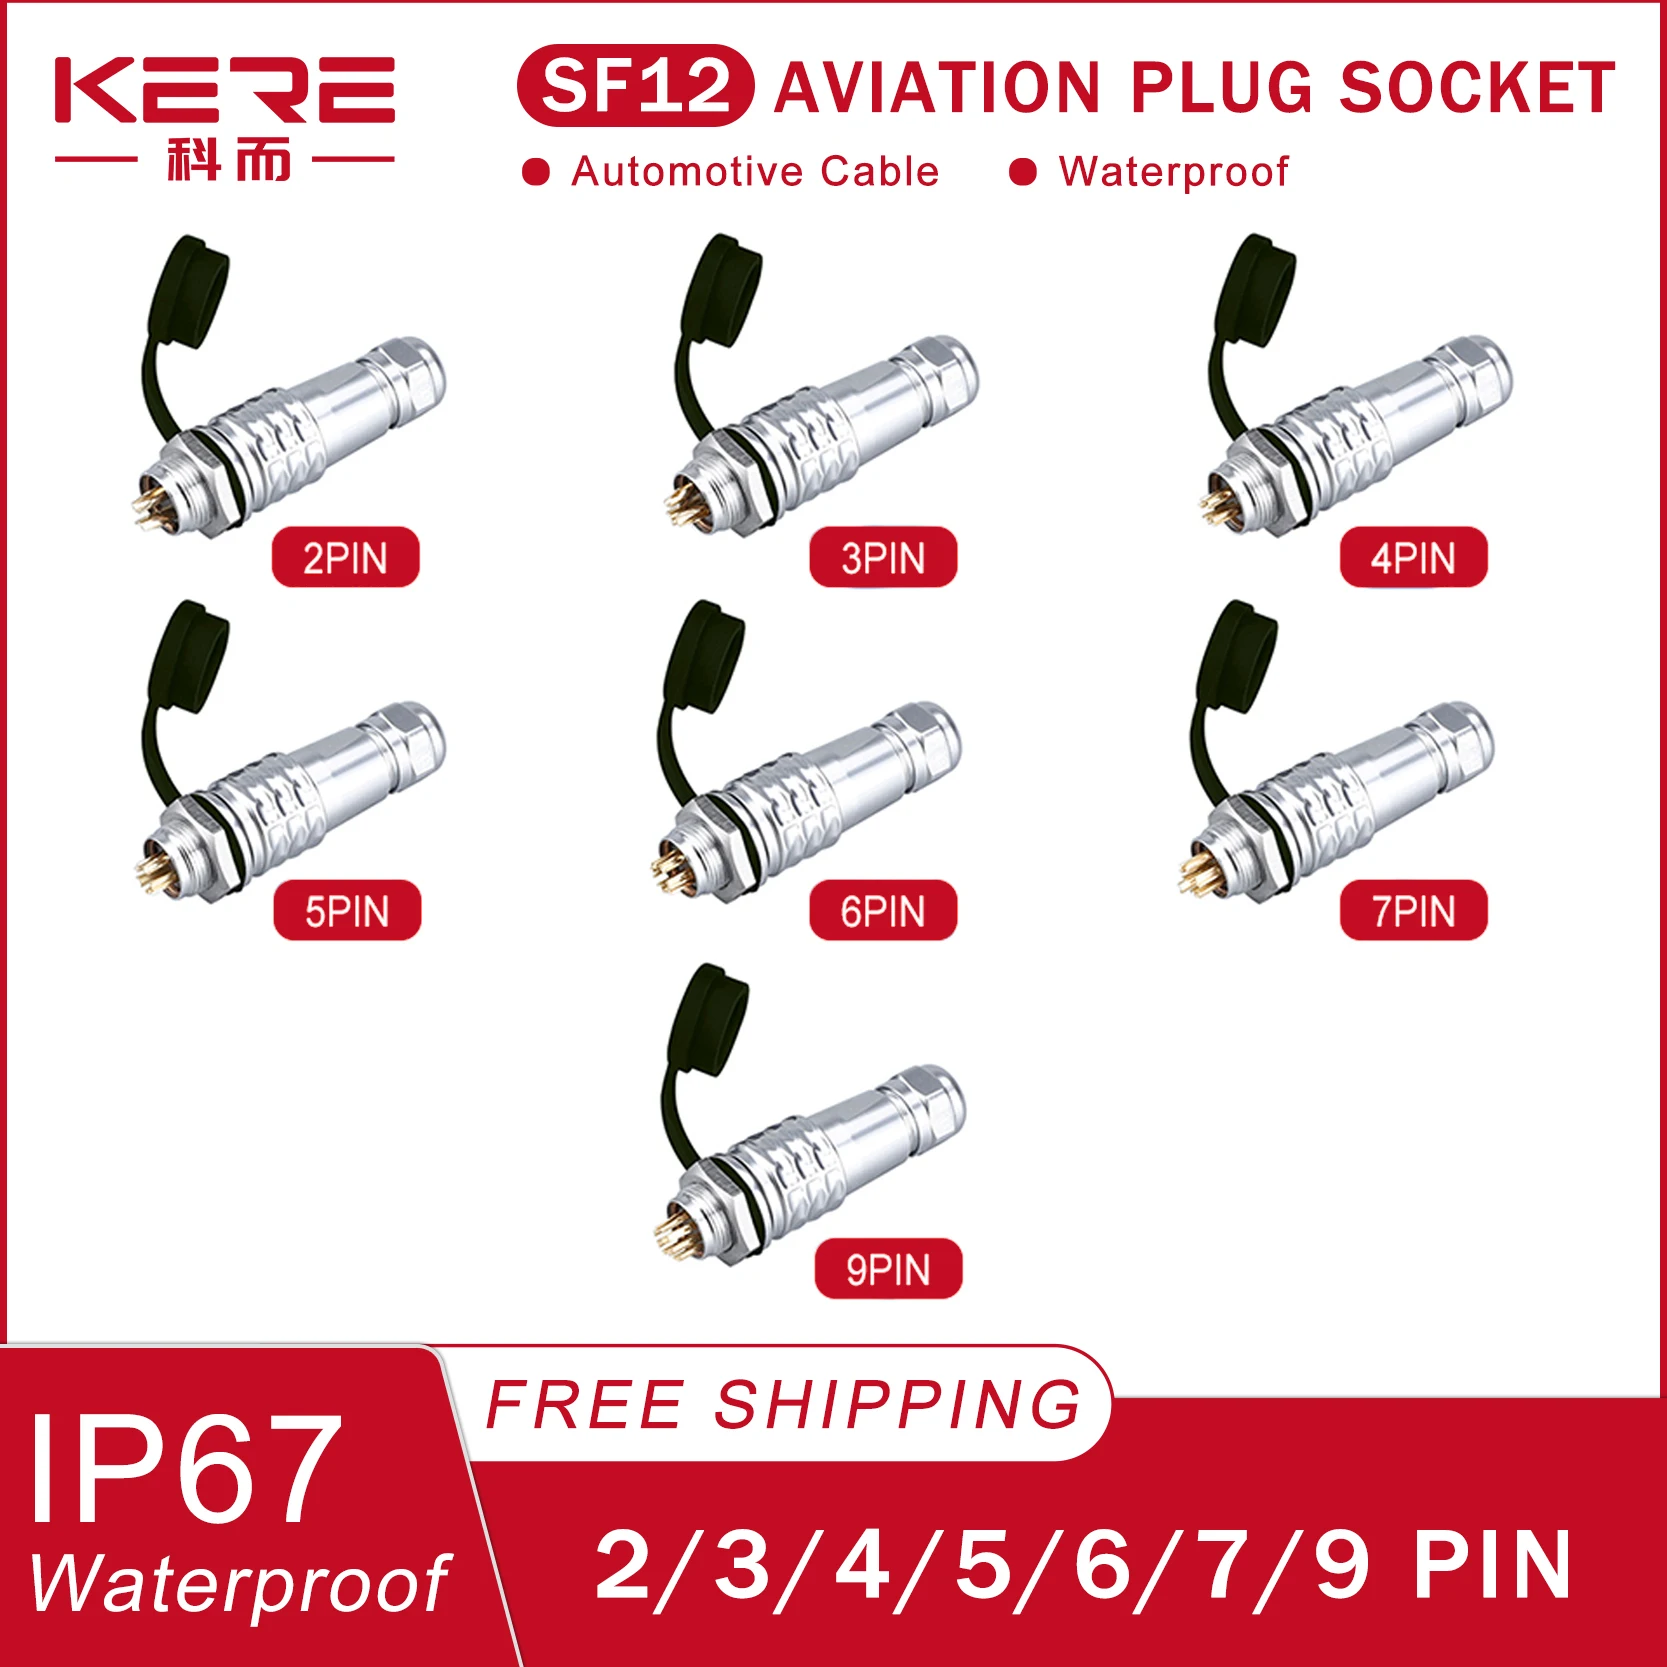 

KERE SF12 Waterproof Metal 2/3/4/5/6/7/9 Pin PUSH-PULL buckle connection 12mm Cable Connector Panel Mount Aviation Plug